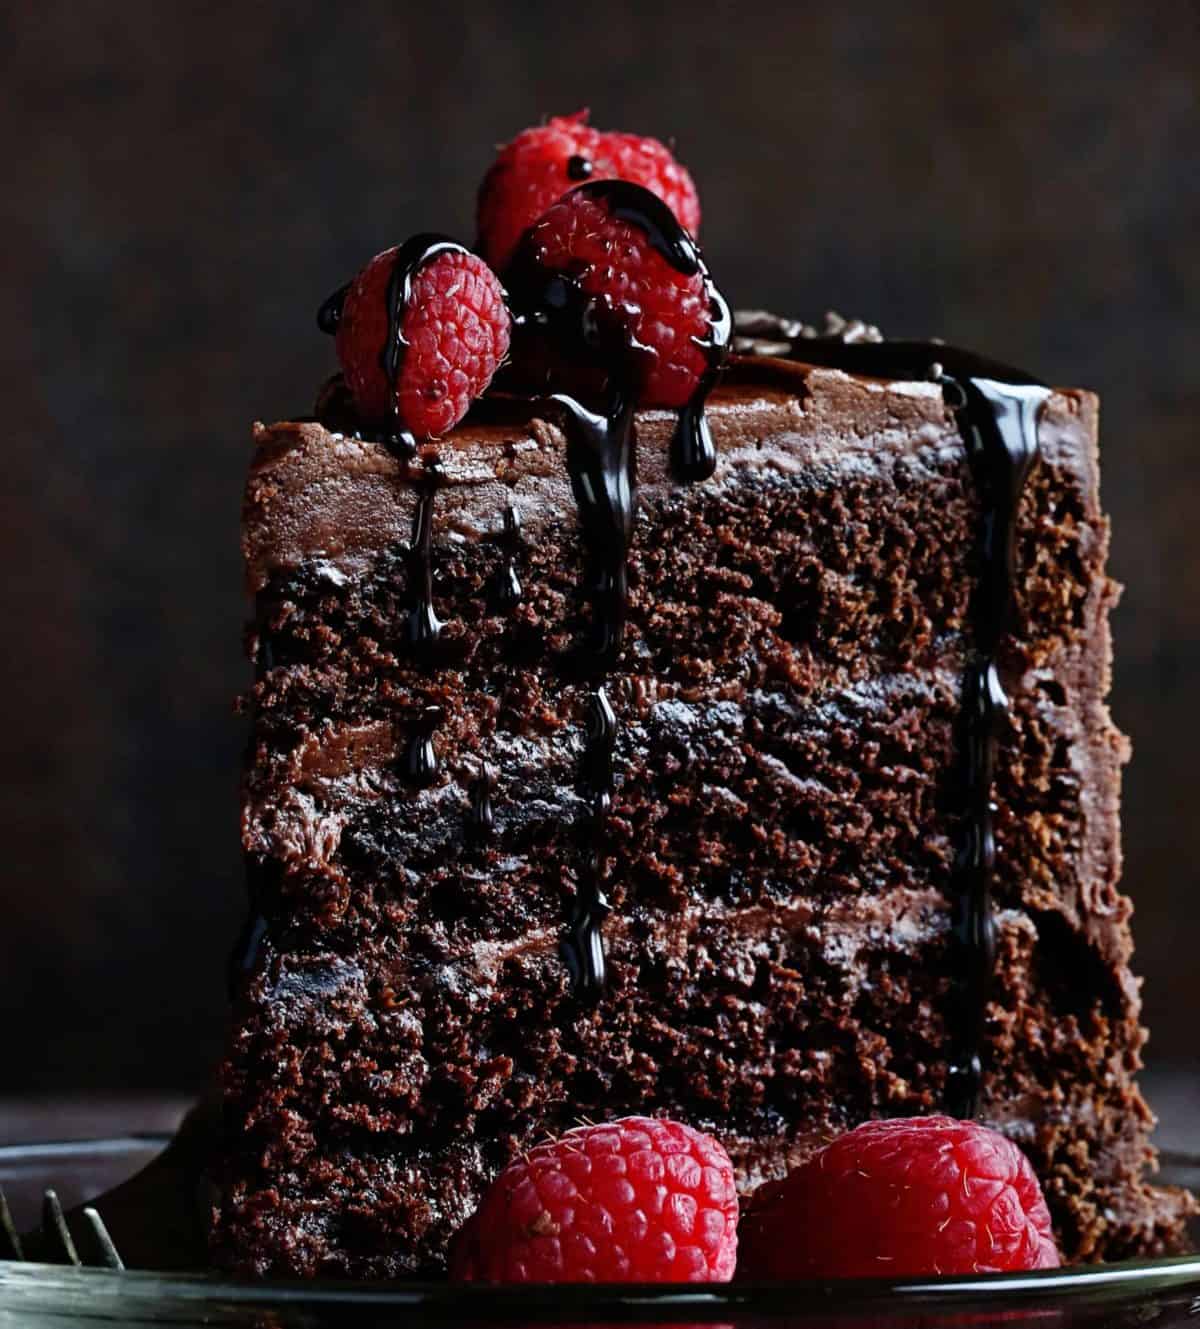 NO FAIL Chocolate Cake! This is the recipe people will ask for again and again!